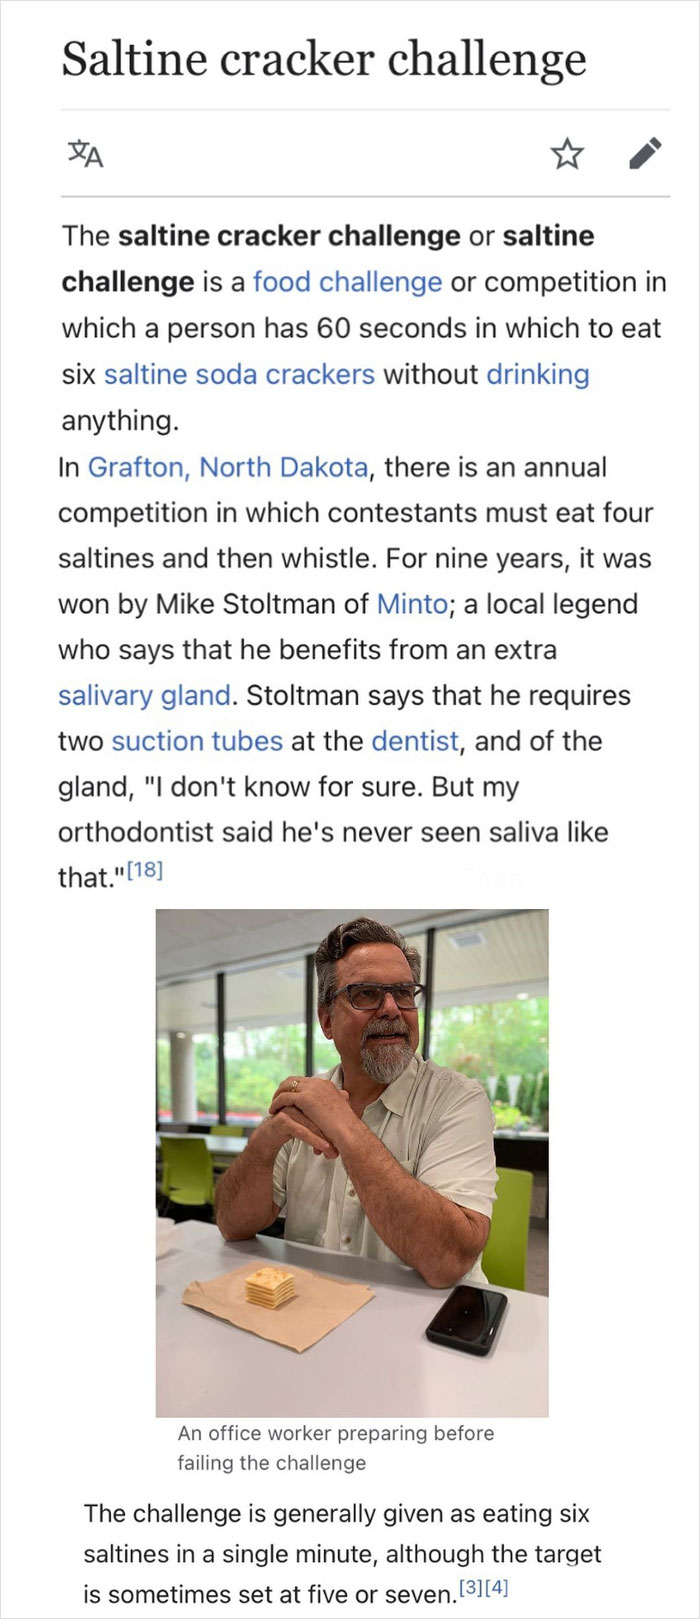 Love The Part About Local Legend Mike Who Won A Competition Nine Years In A Row Due To His Ability To Produce Collosal Amounts Of Saliva (He Reports That He Requires Two Suction Cups At The Dentist)